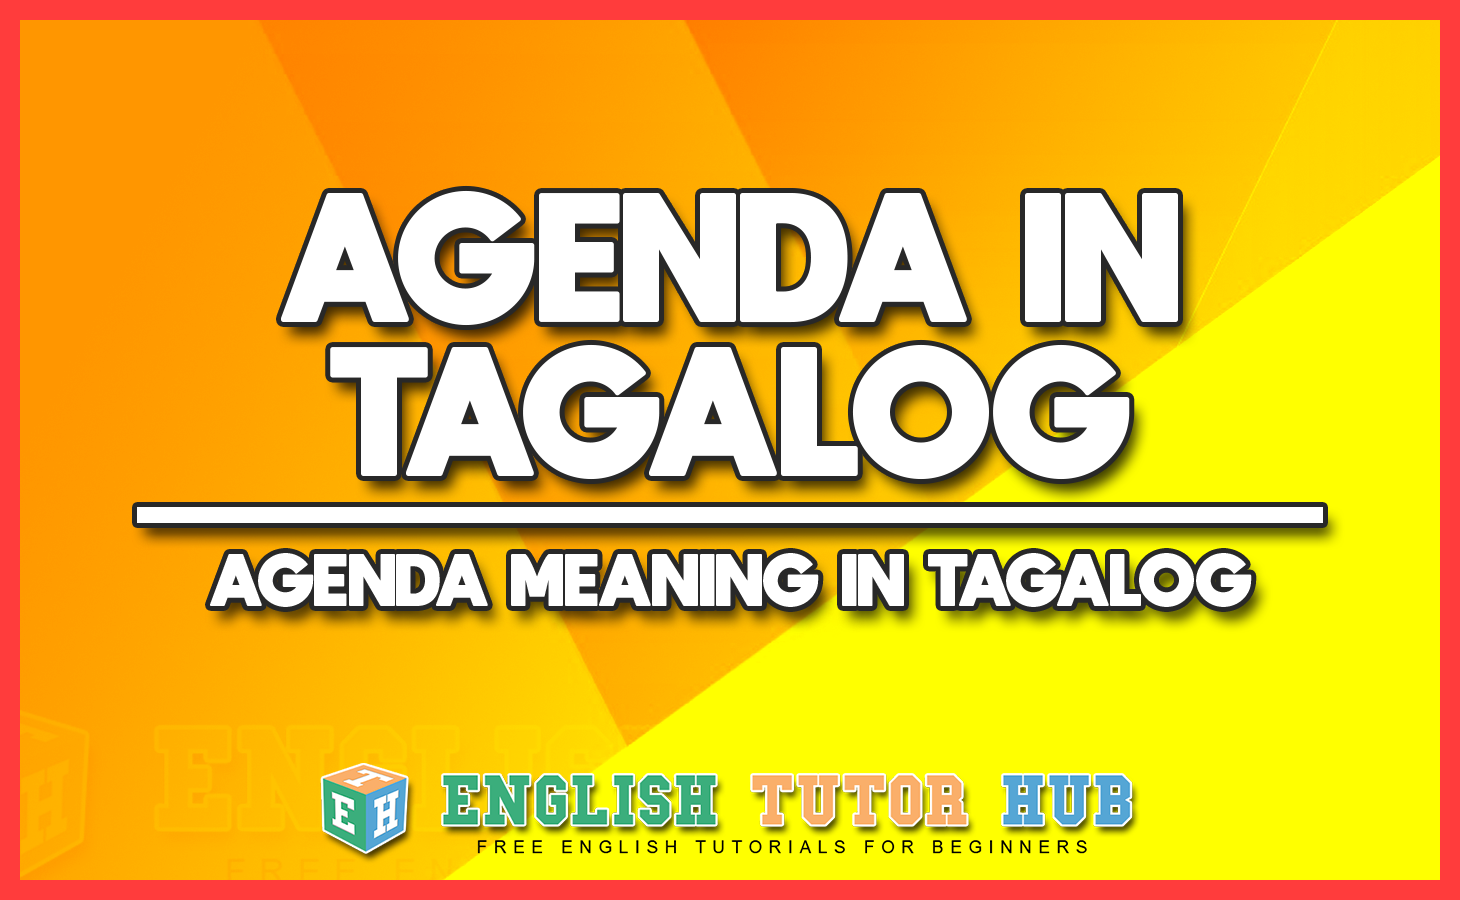 AGENDA IN TAGALOG - AGENDA MEANING IN TAGALOG